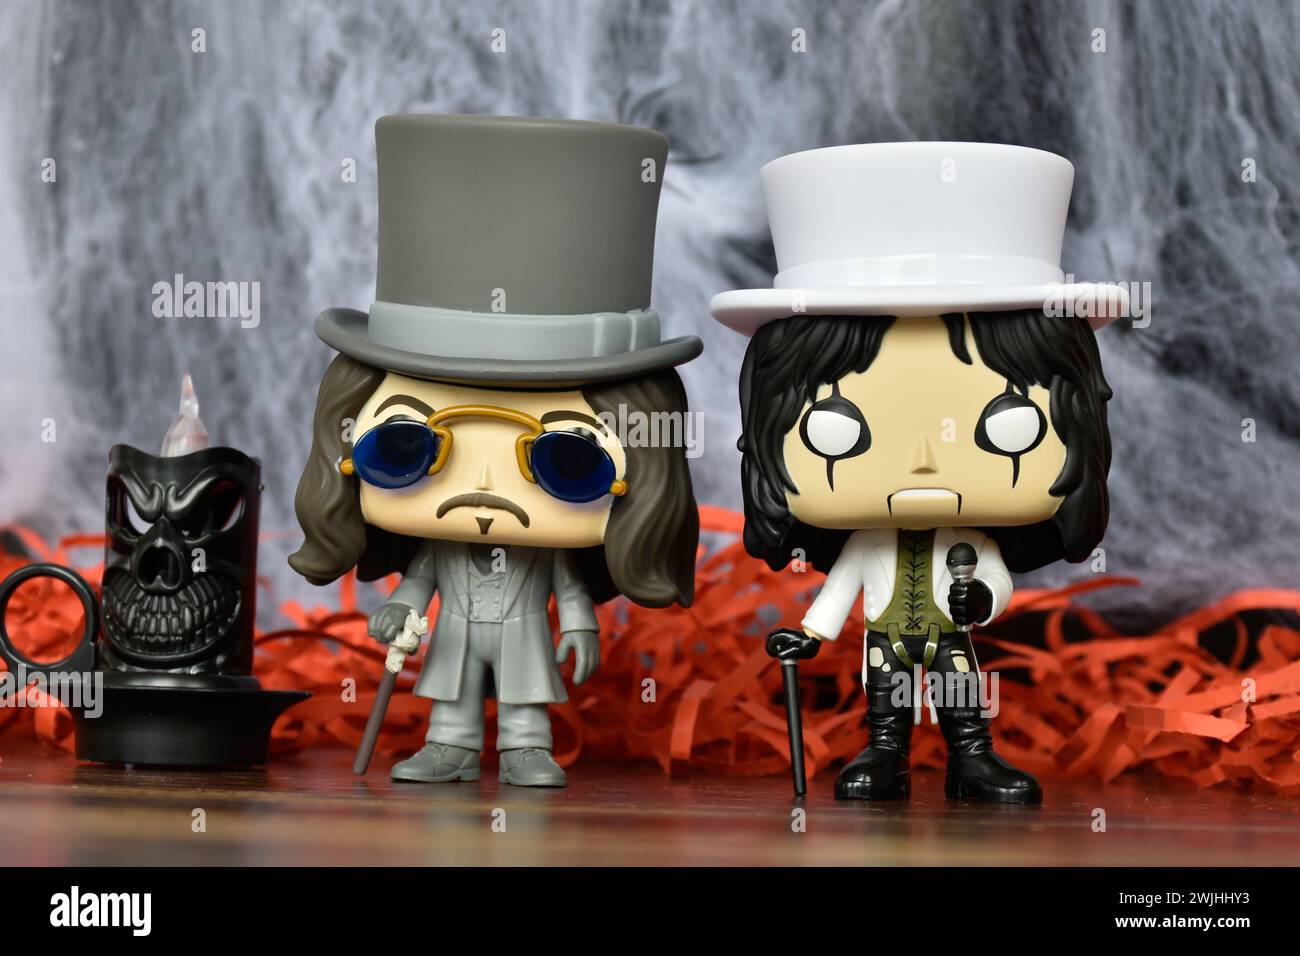 Funko Pop action figures of Bram Stoker's Dracula vampire and hard rock singer showman Alice Cooper. Spooky decor, black candle, gothic, horror mood. Stock Photo